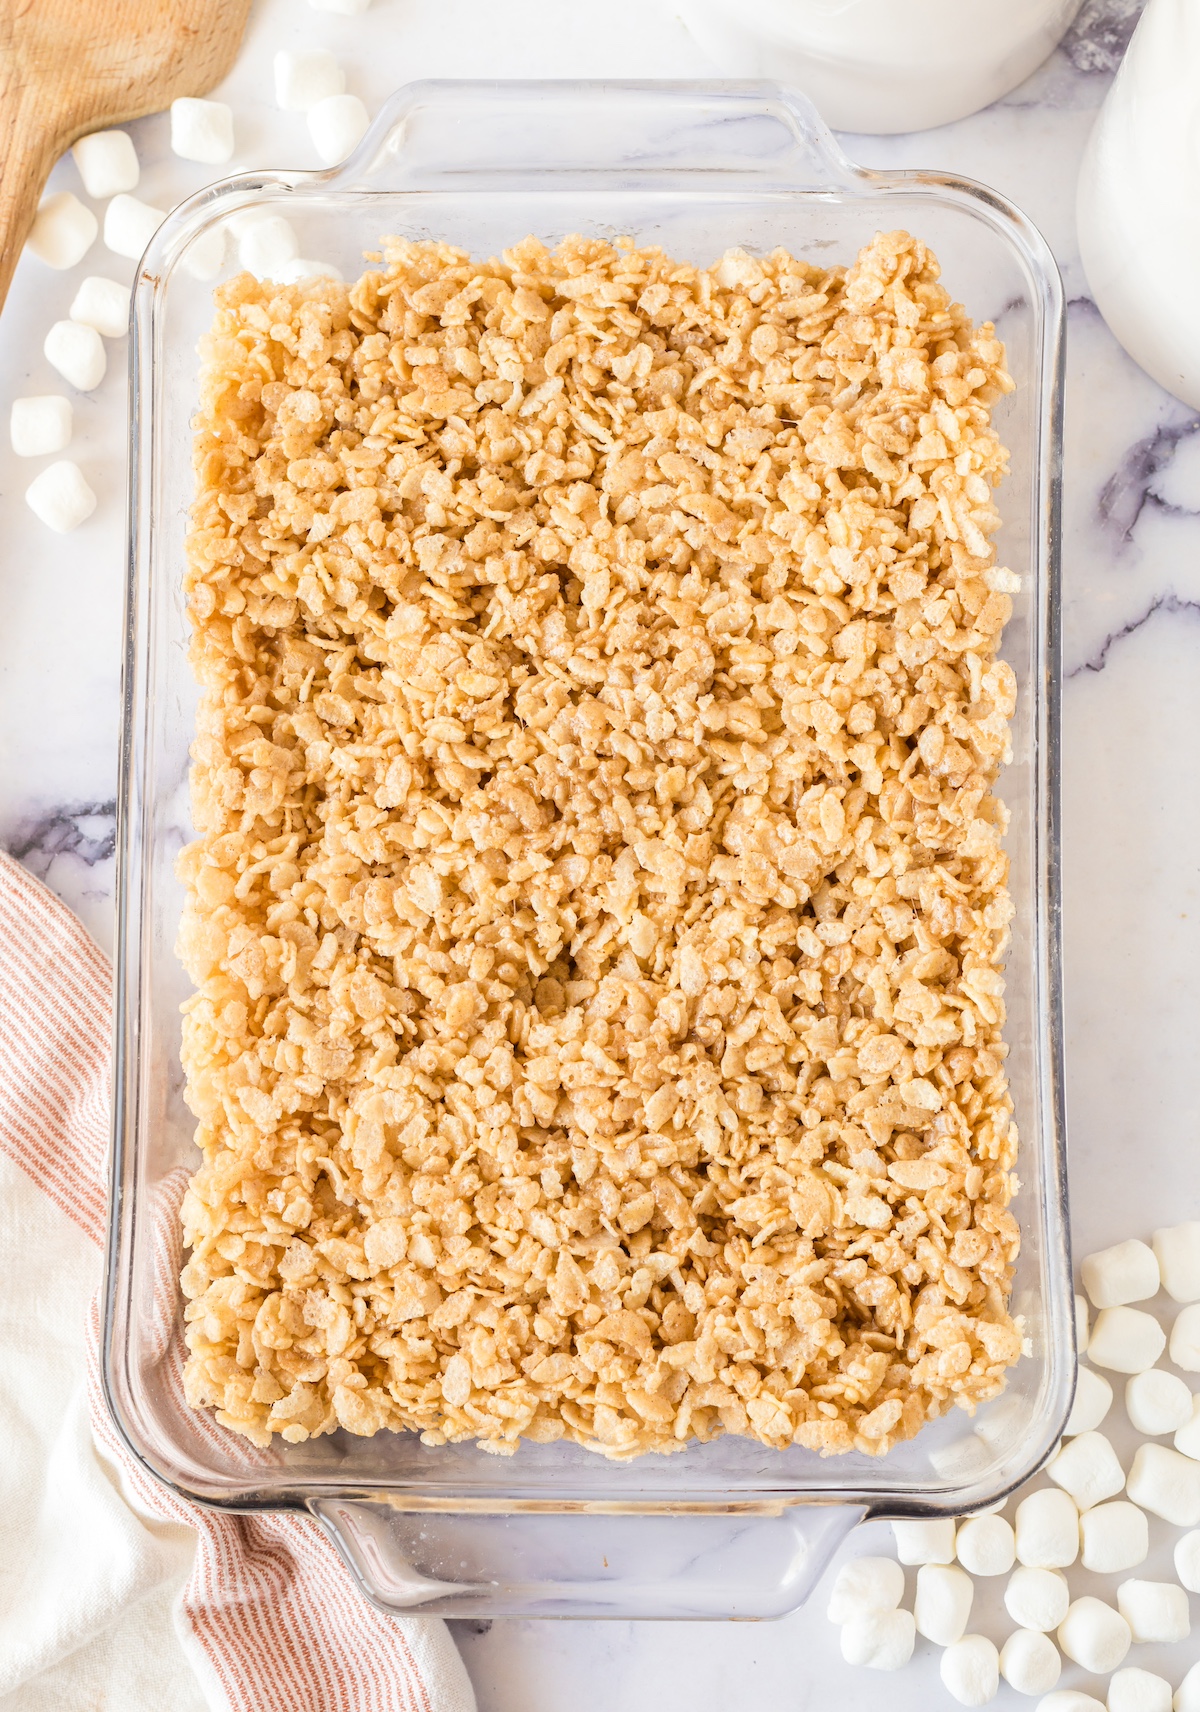 Cereal and marshmallow mixture spread into a glass pan